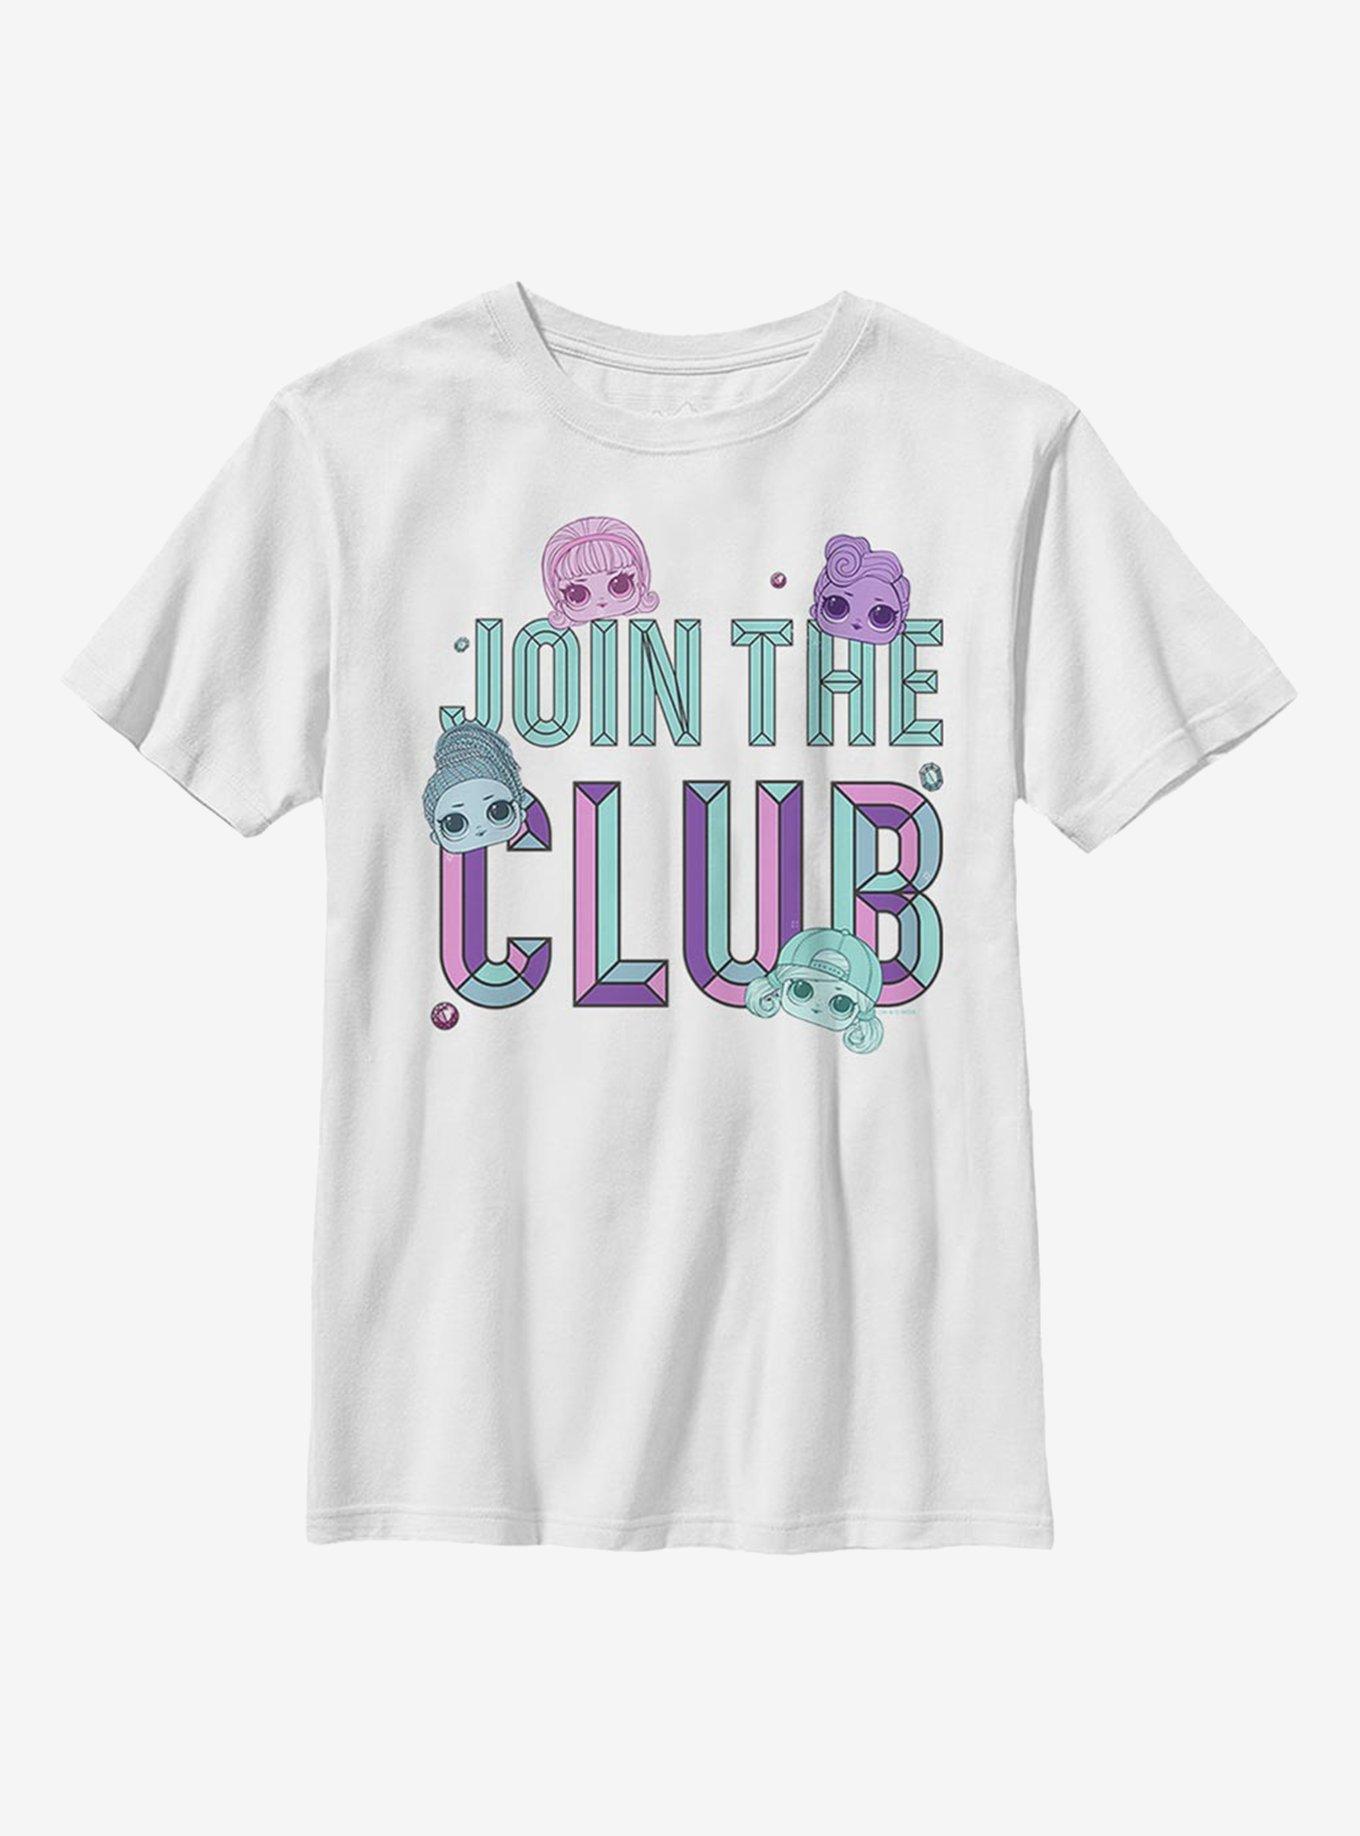 L.O.L. Surprise! Join The Club Youth T-Shirt, WHITE, hi-res